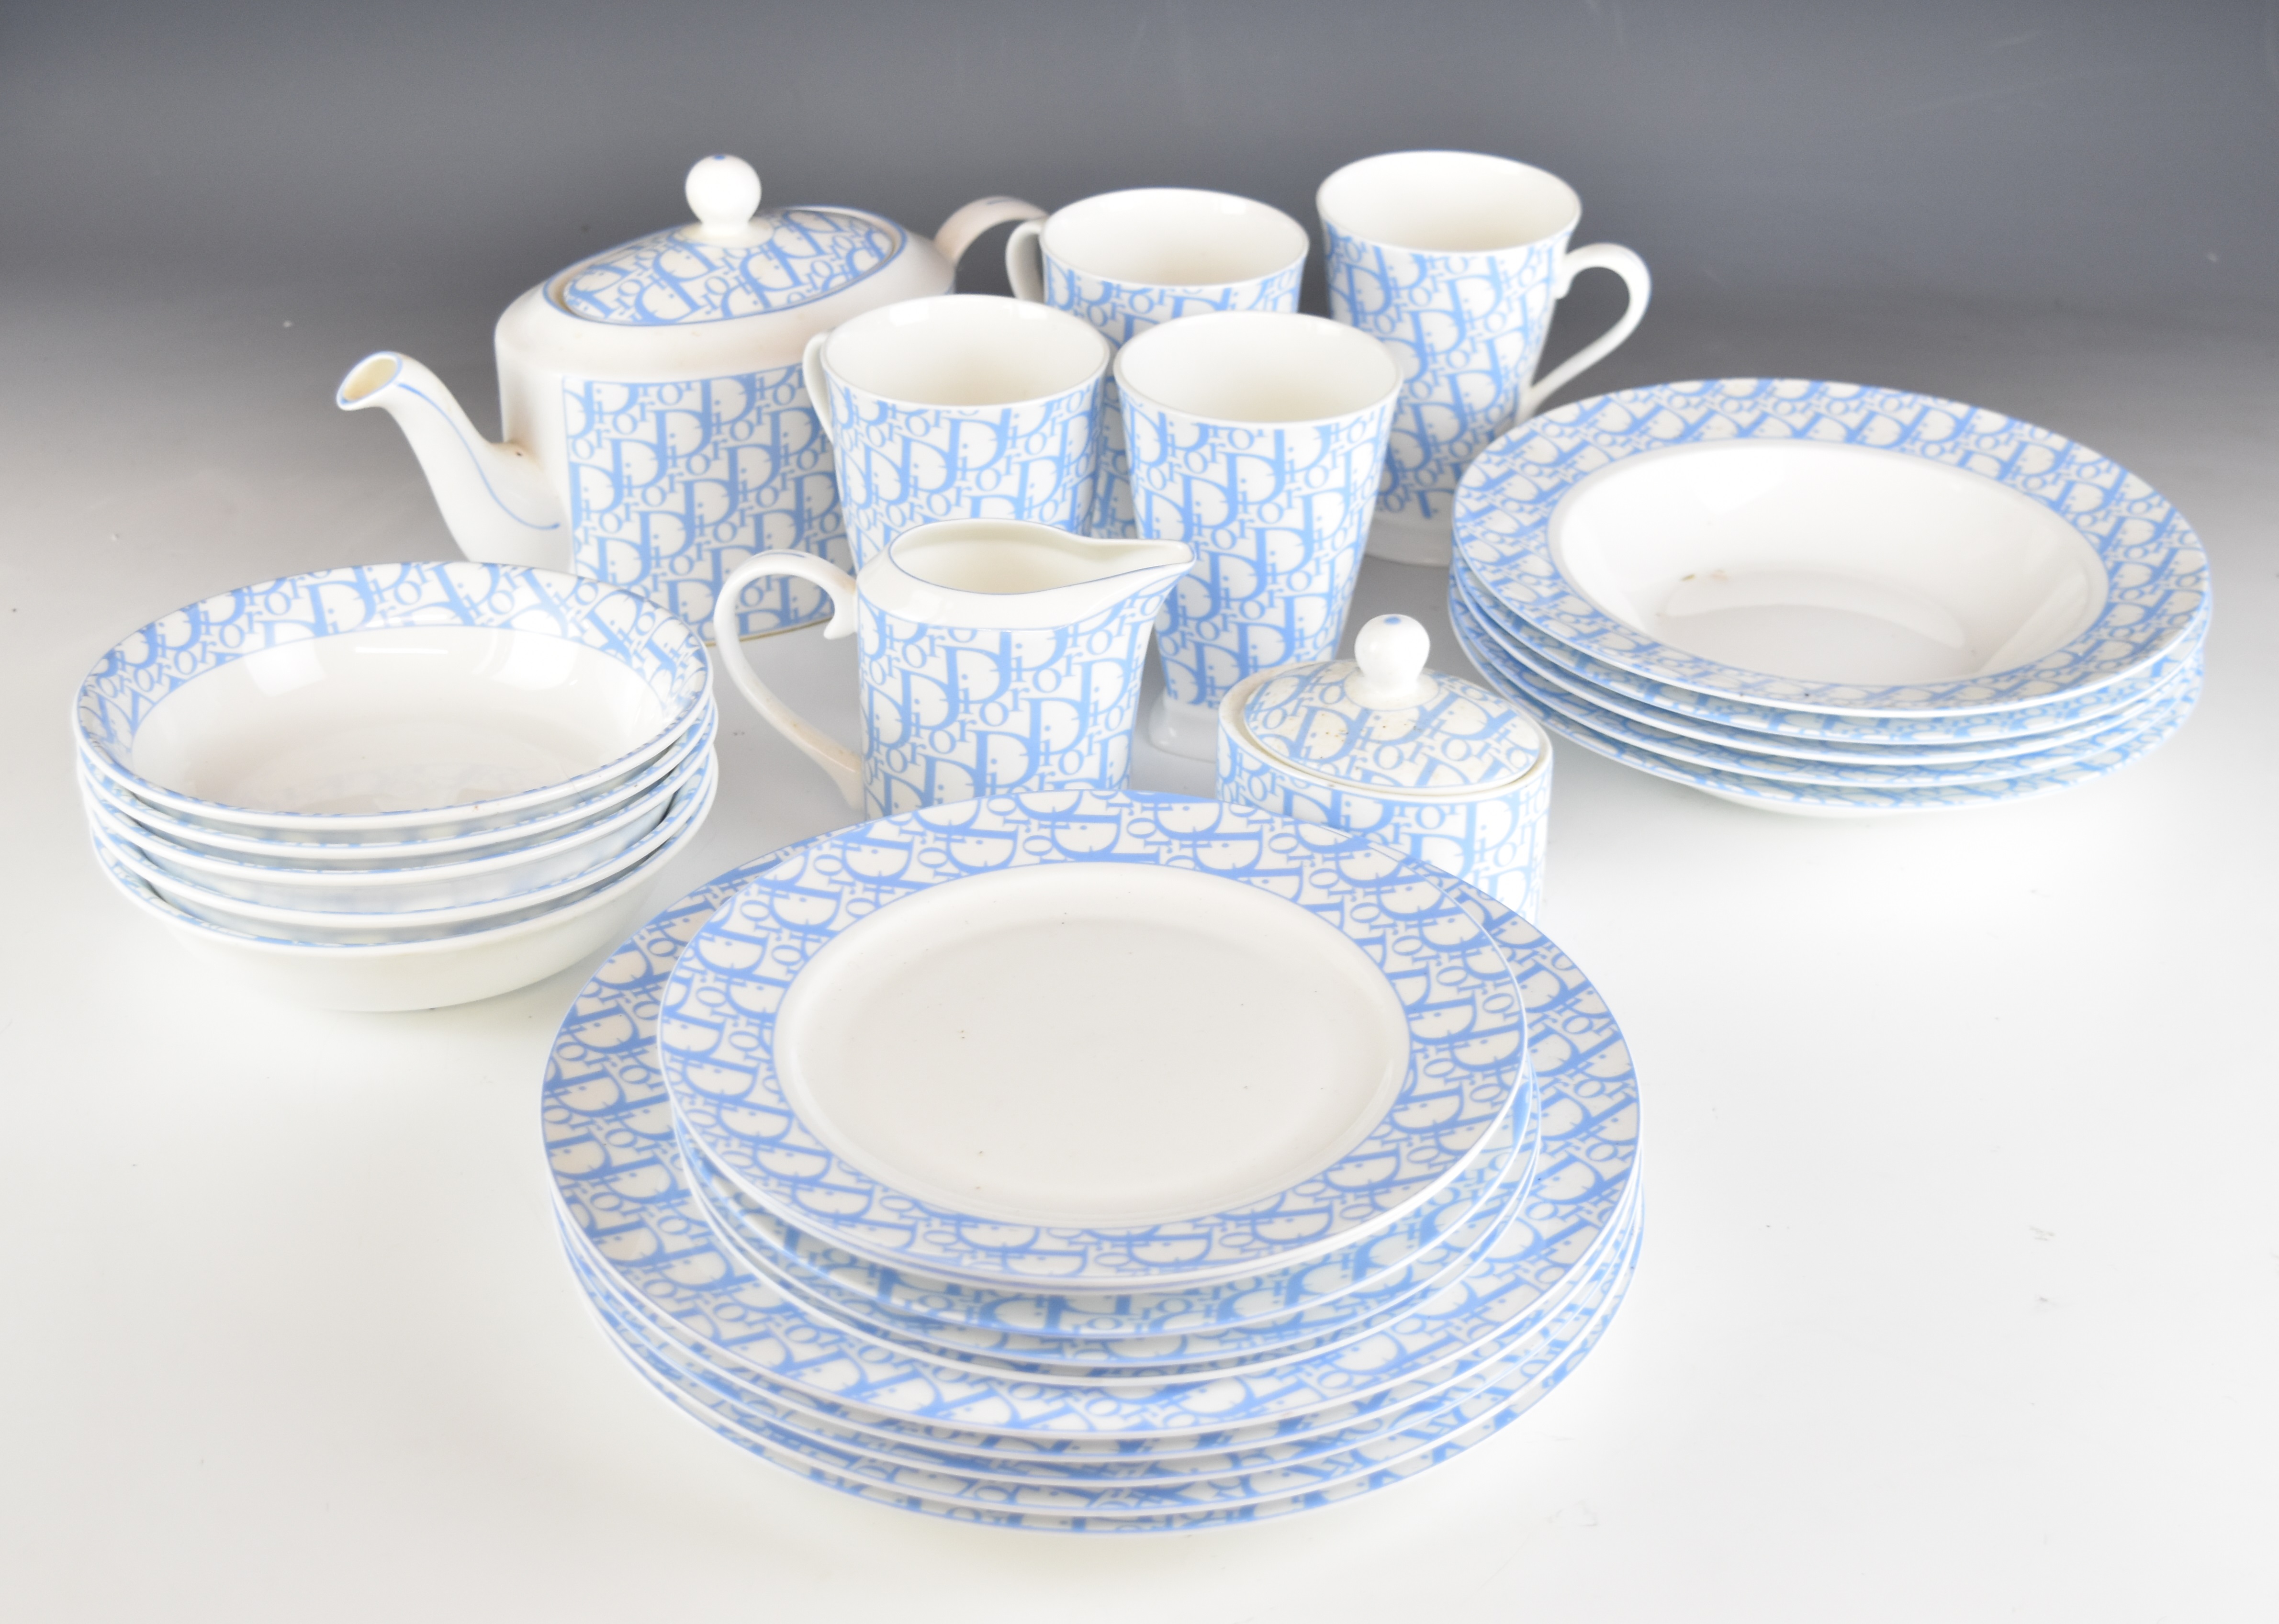 Dior designer porcelain dinner and teaware with Dior motif decoration, approximately 27 pieces, - Image 8 of 14